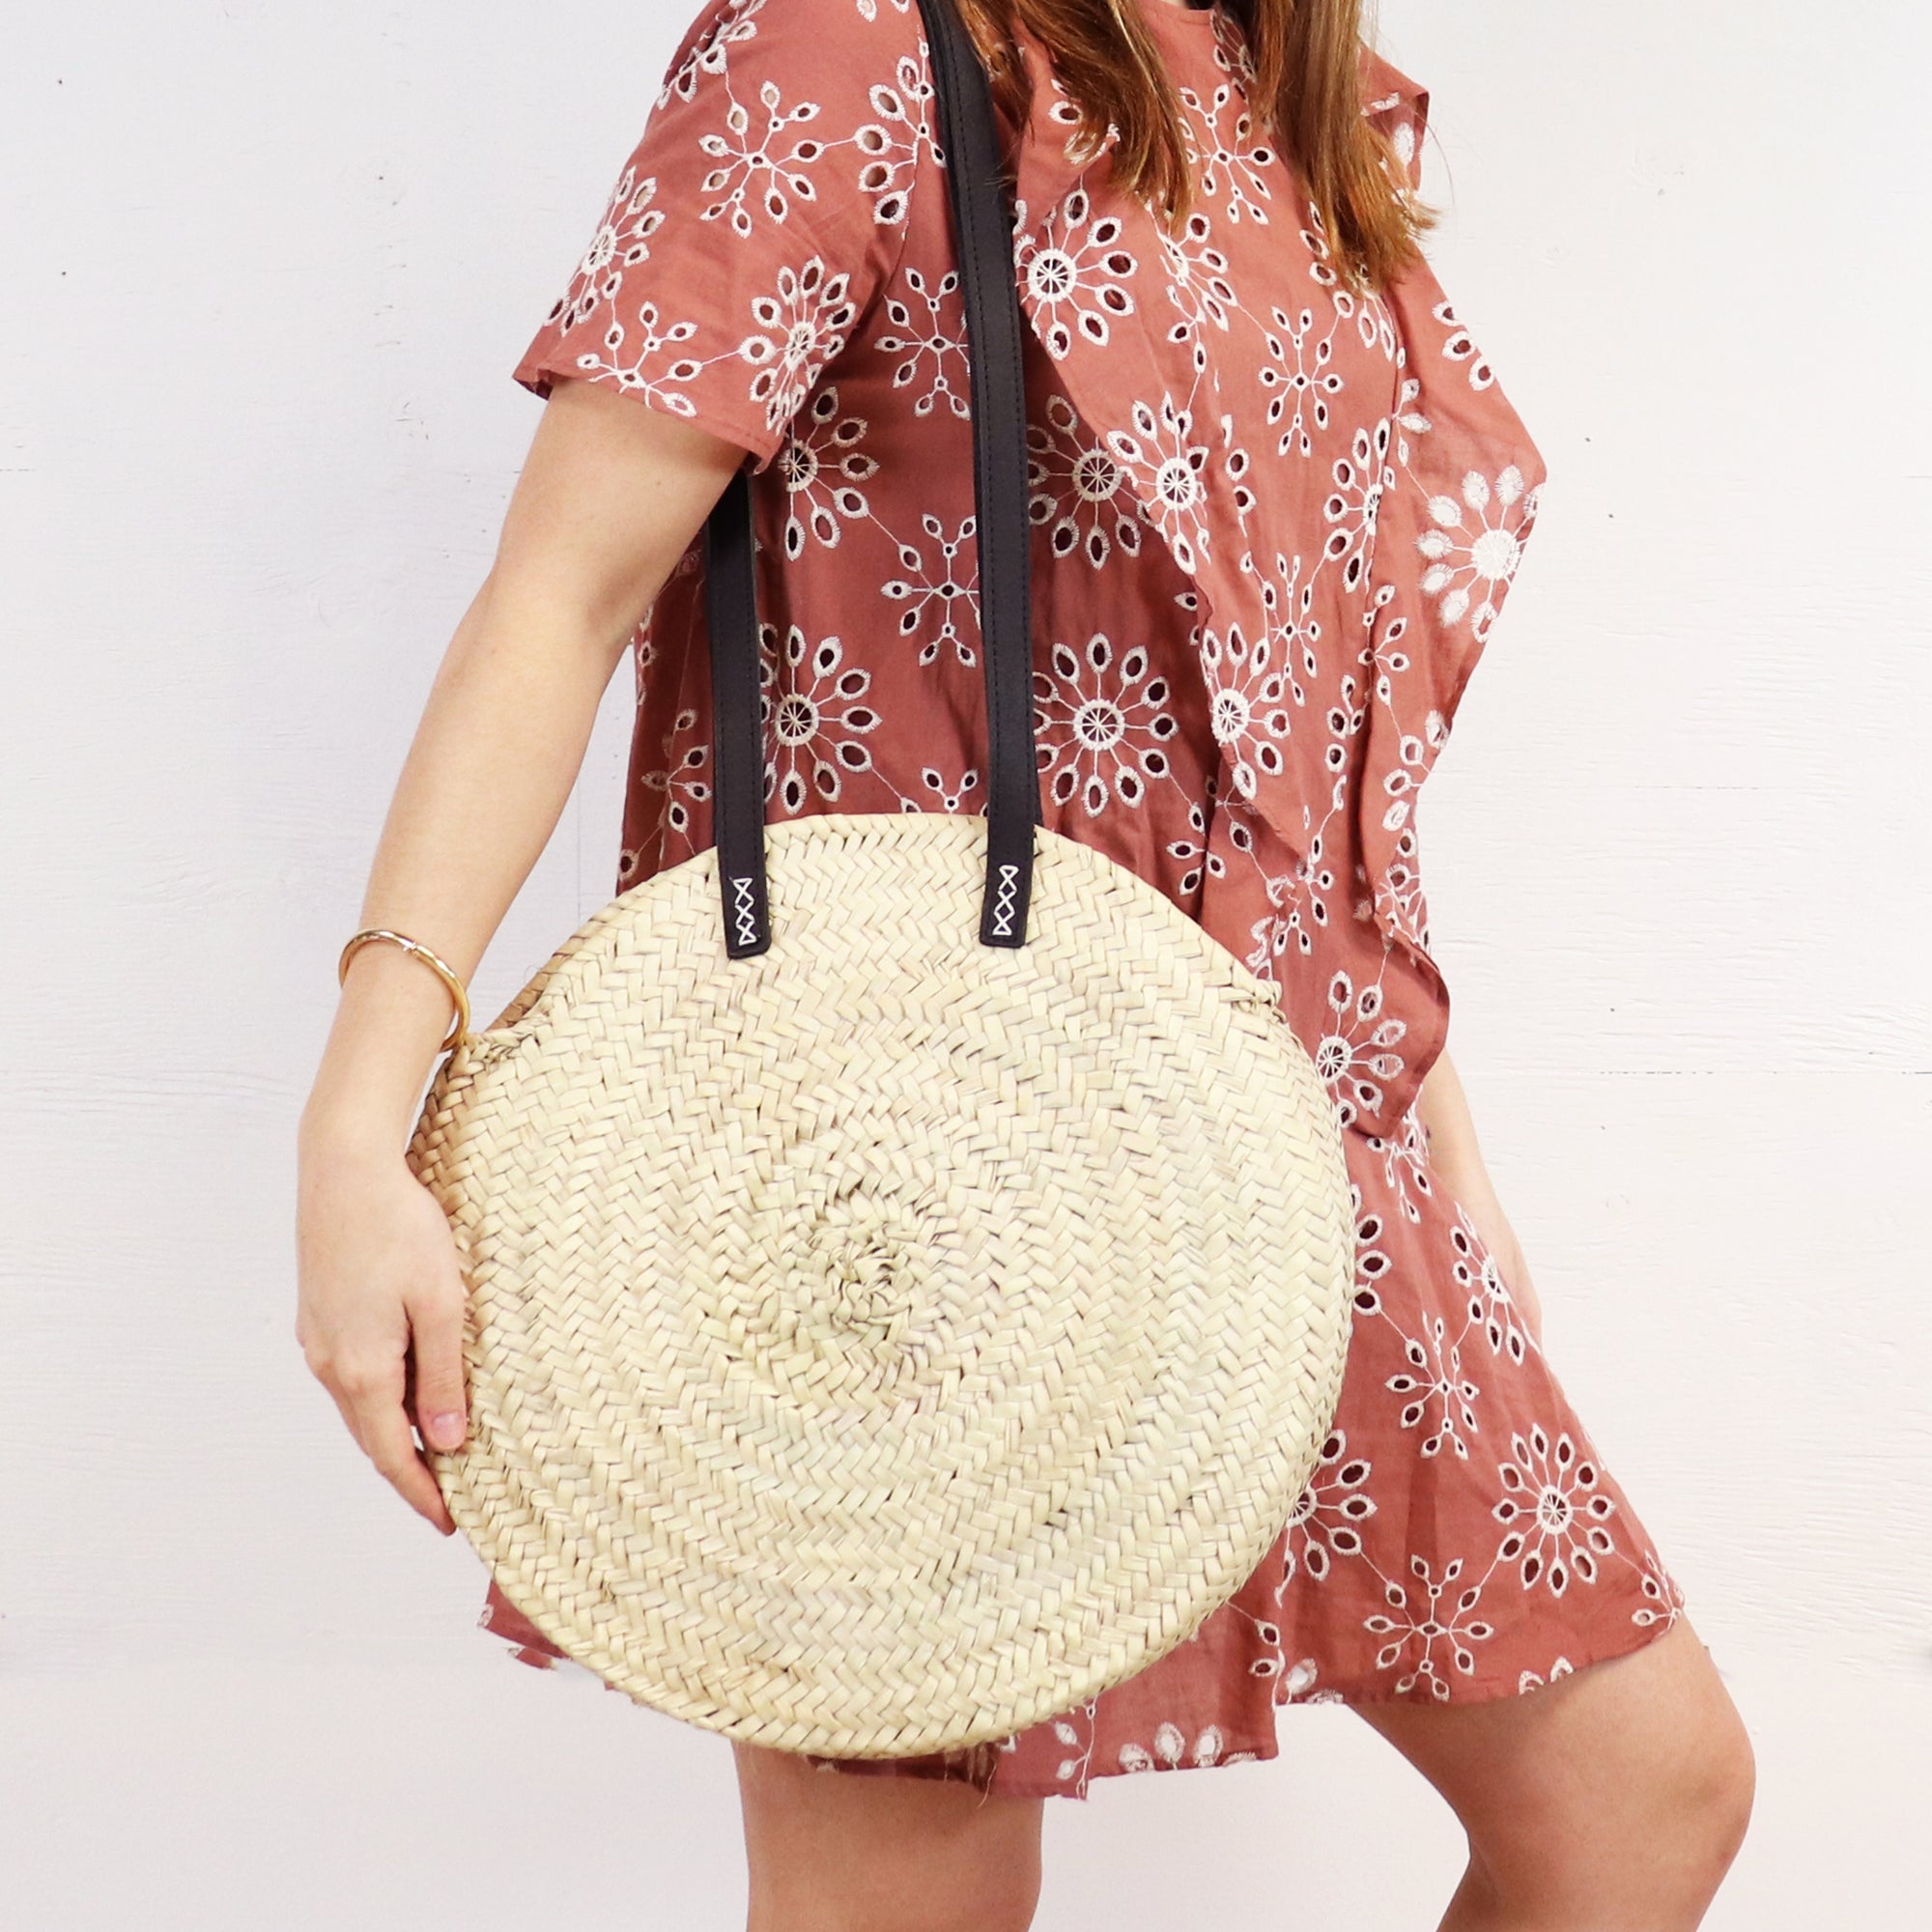 Palmita Straw Tote with Leather Handles